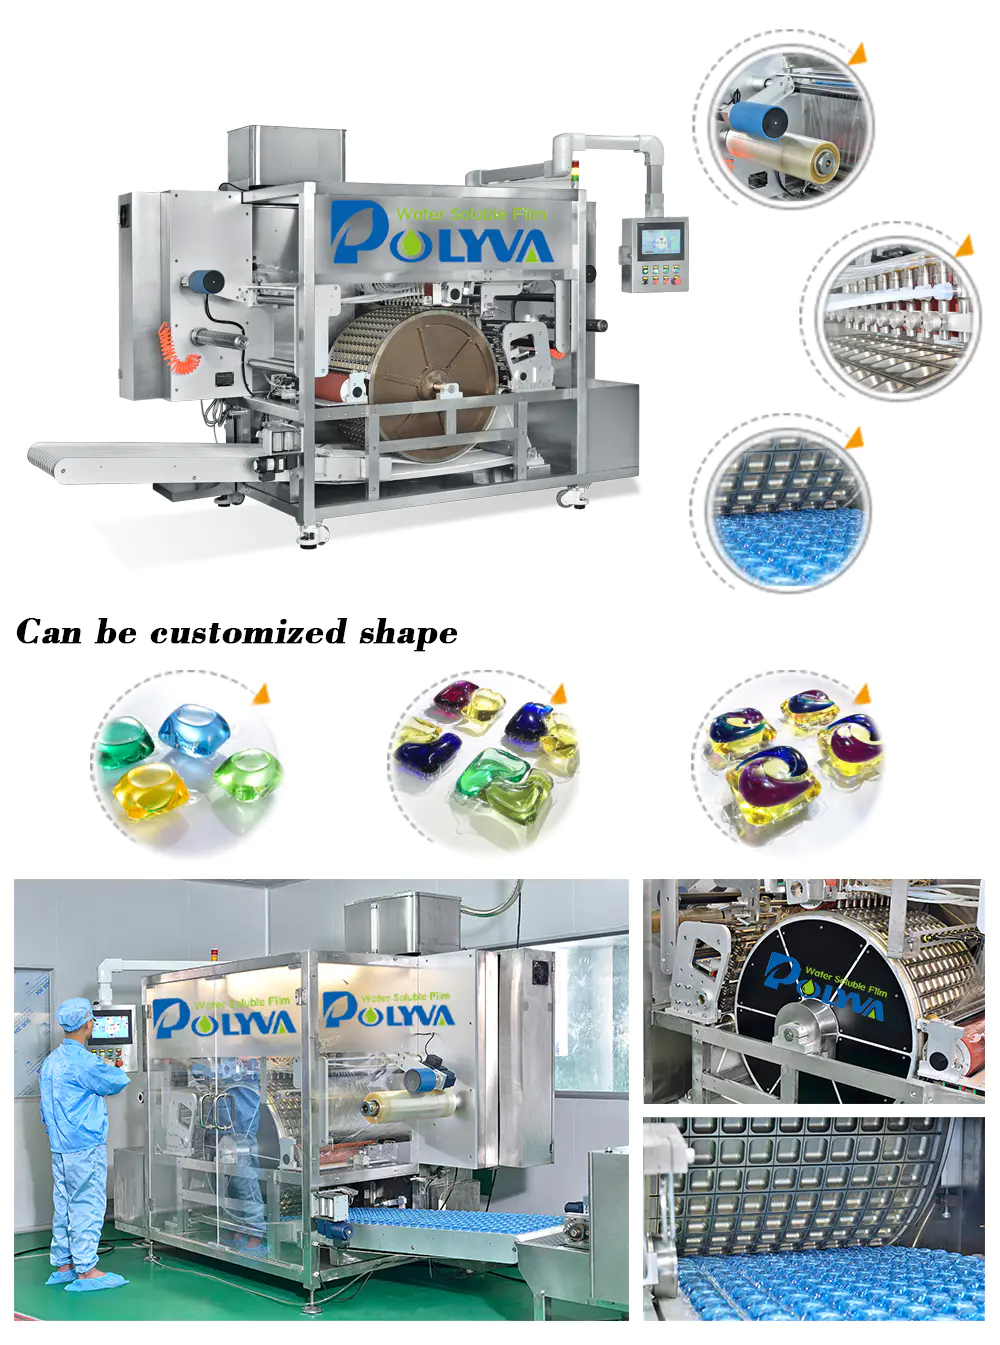 POLYVA water soluble packaging manufacturer for liquid pods